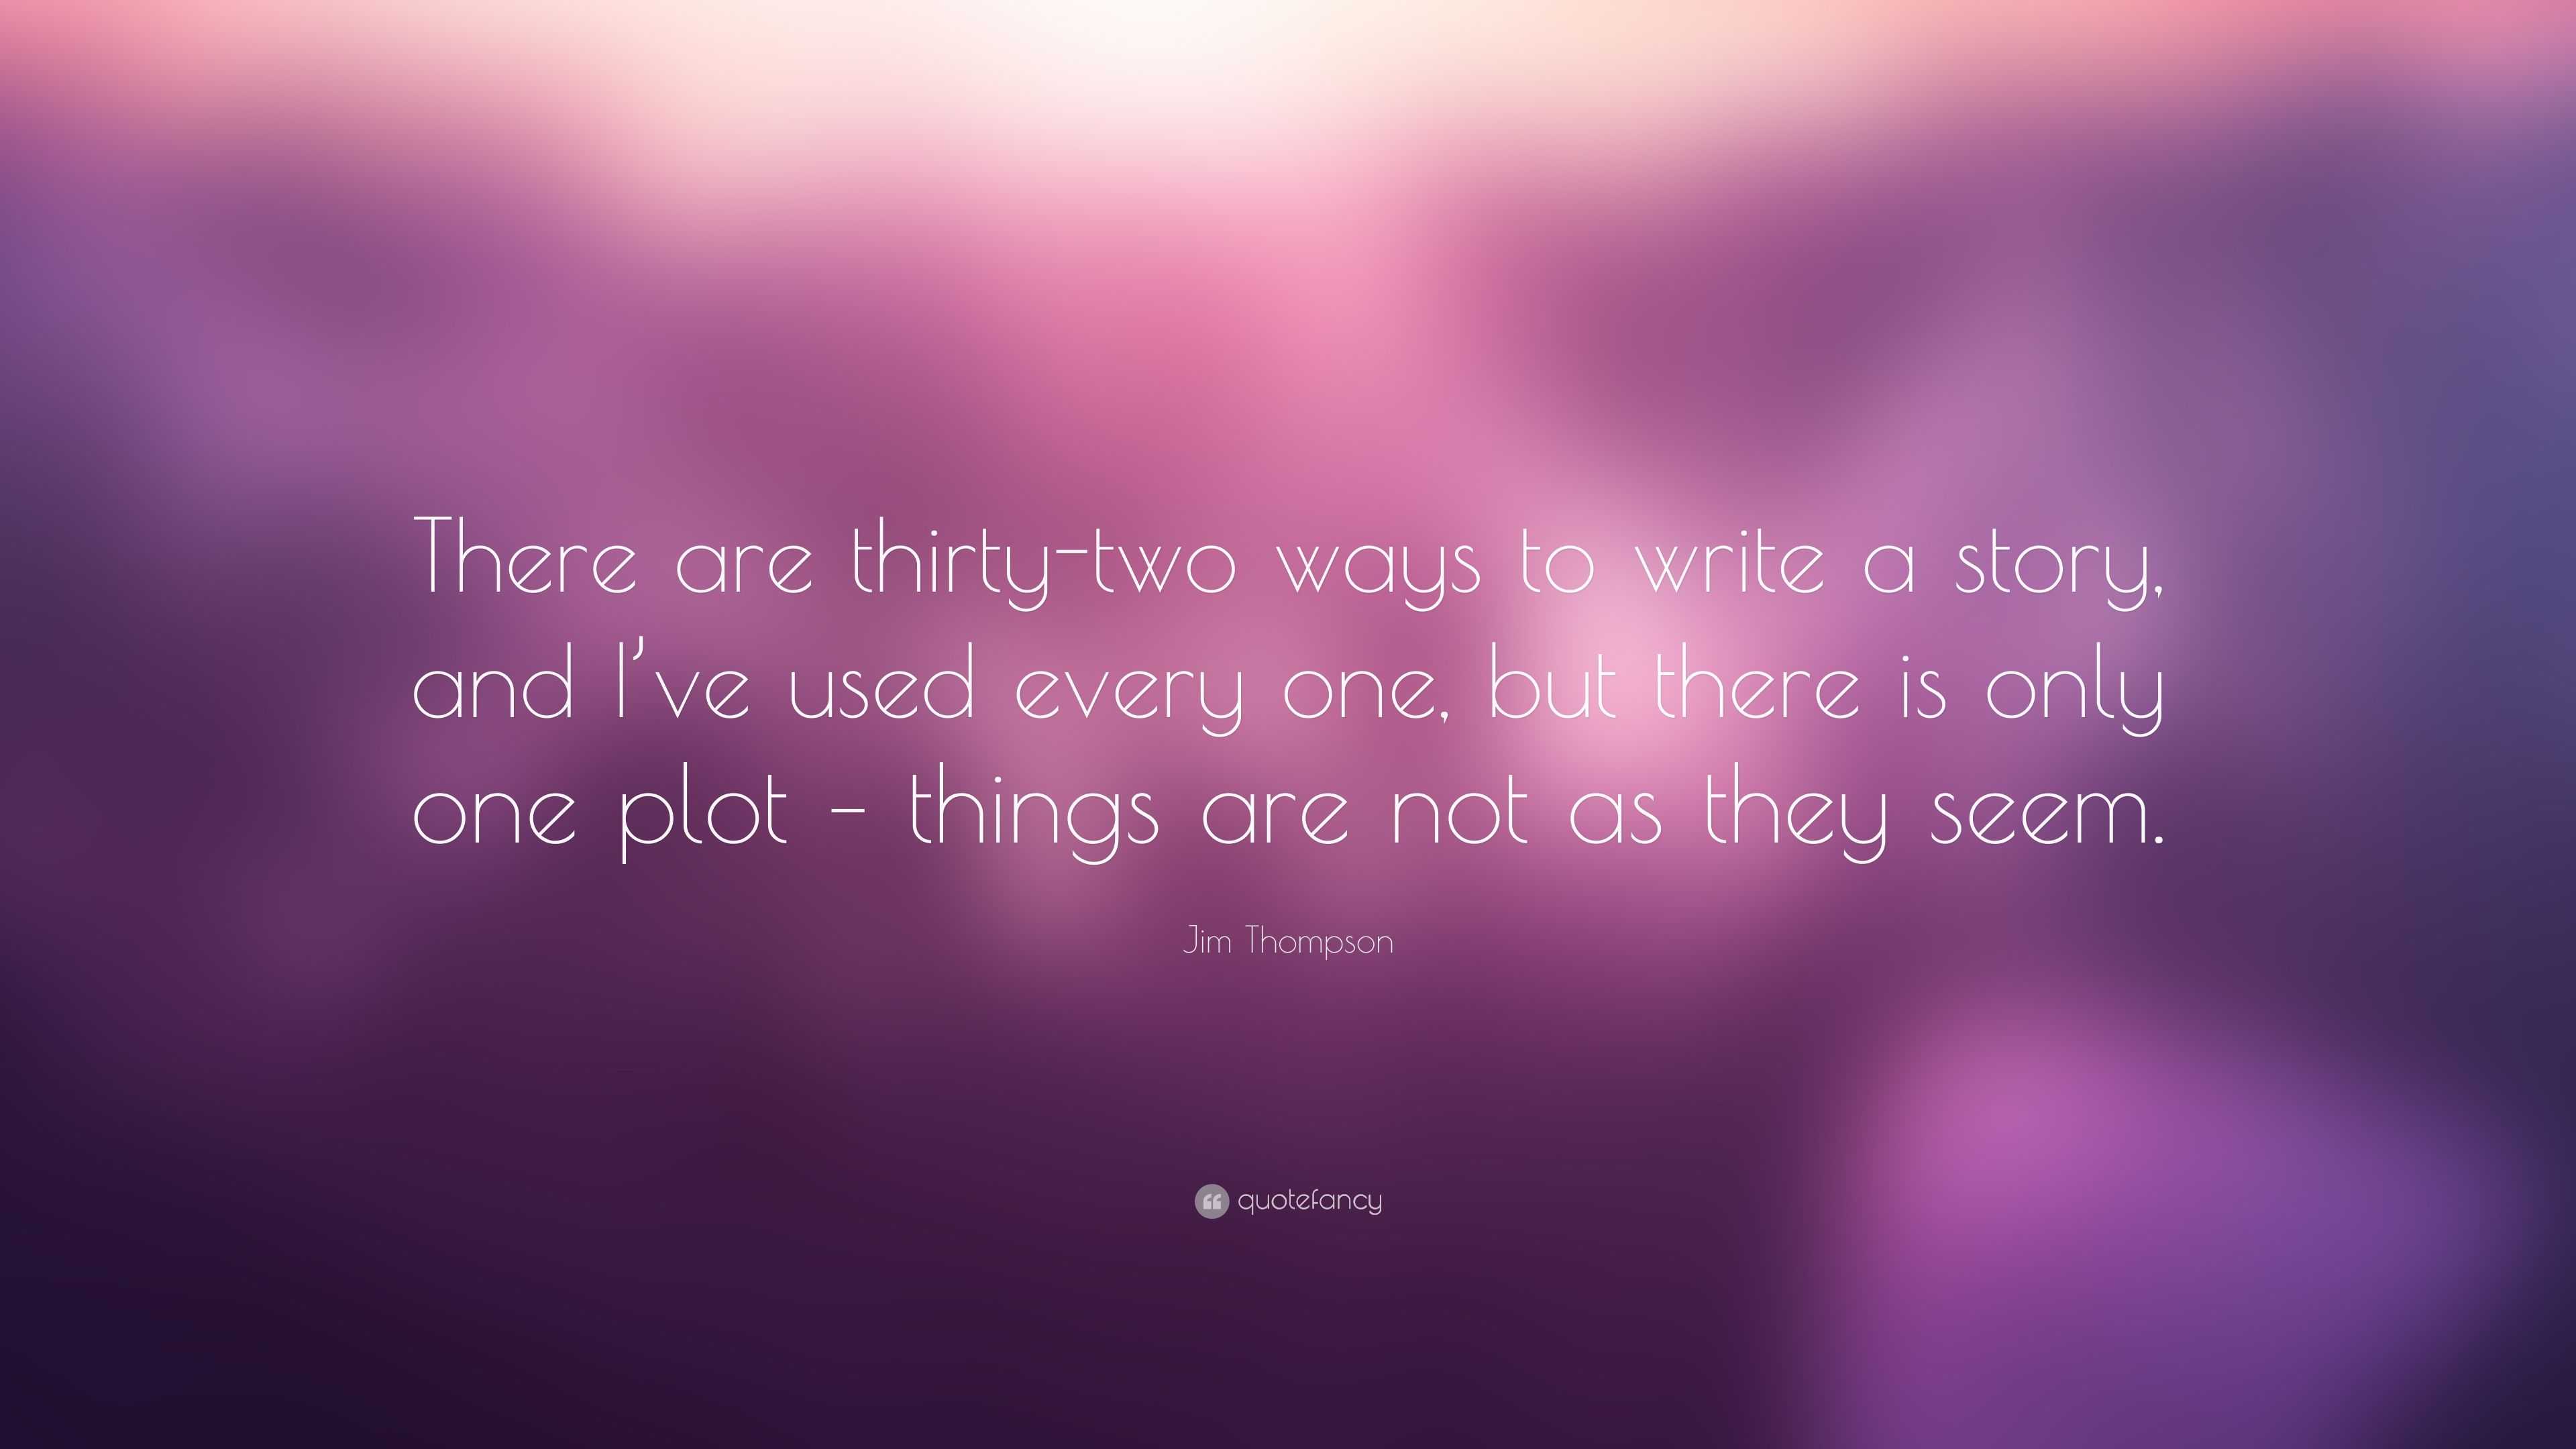 Jim Thompson Quote: “There are thirty-two ways to write a story, and I ...